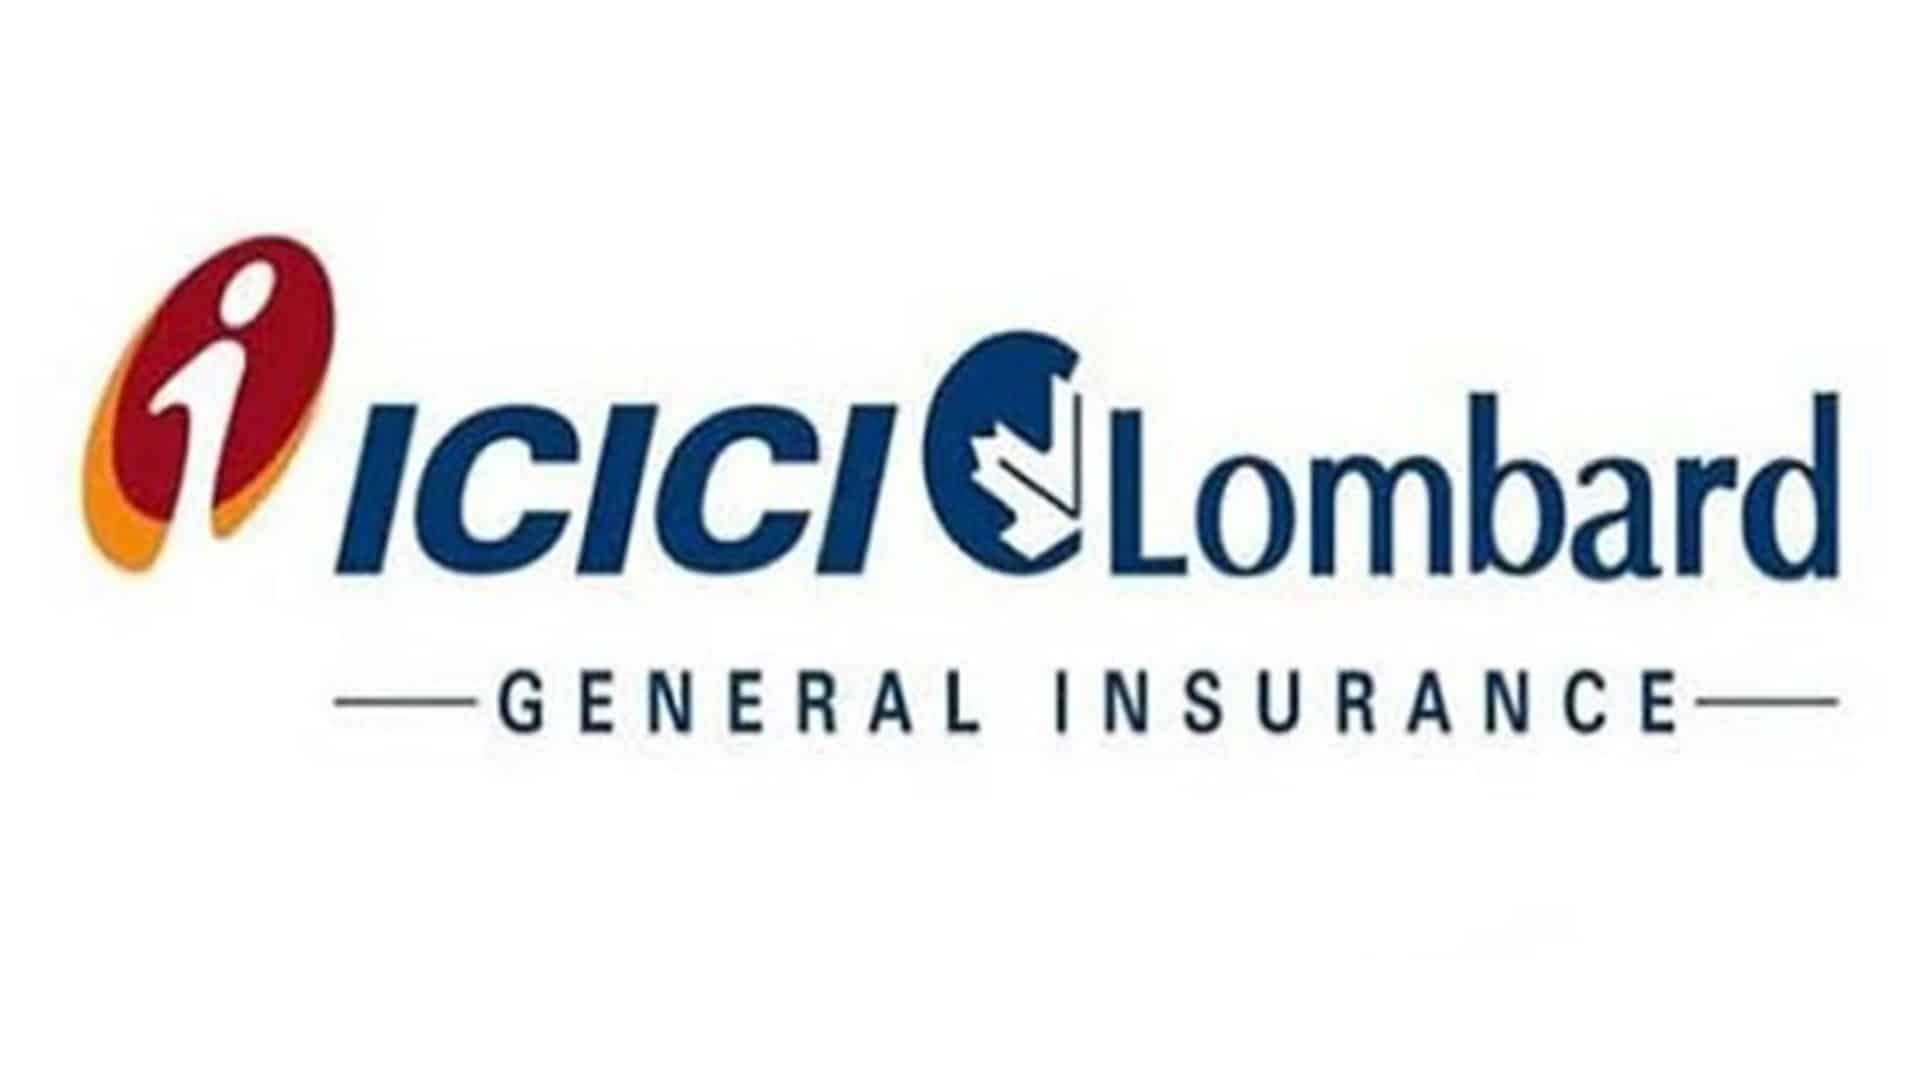 Irdai grants final approval to Bharti AXA - ICICI Lombard deal